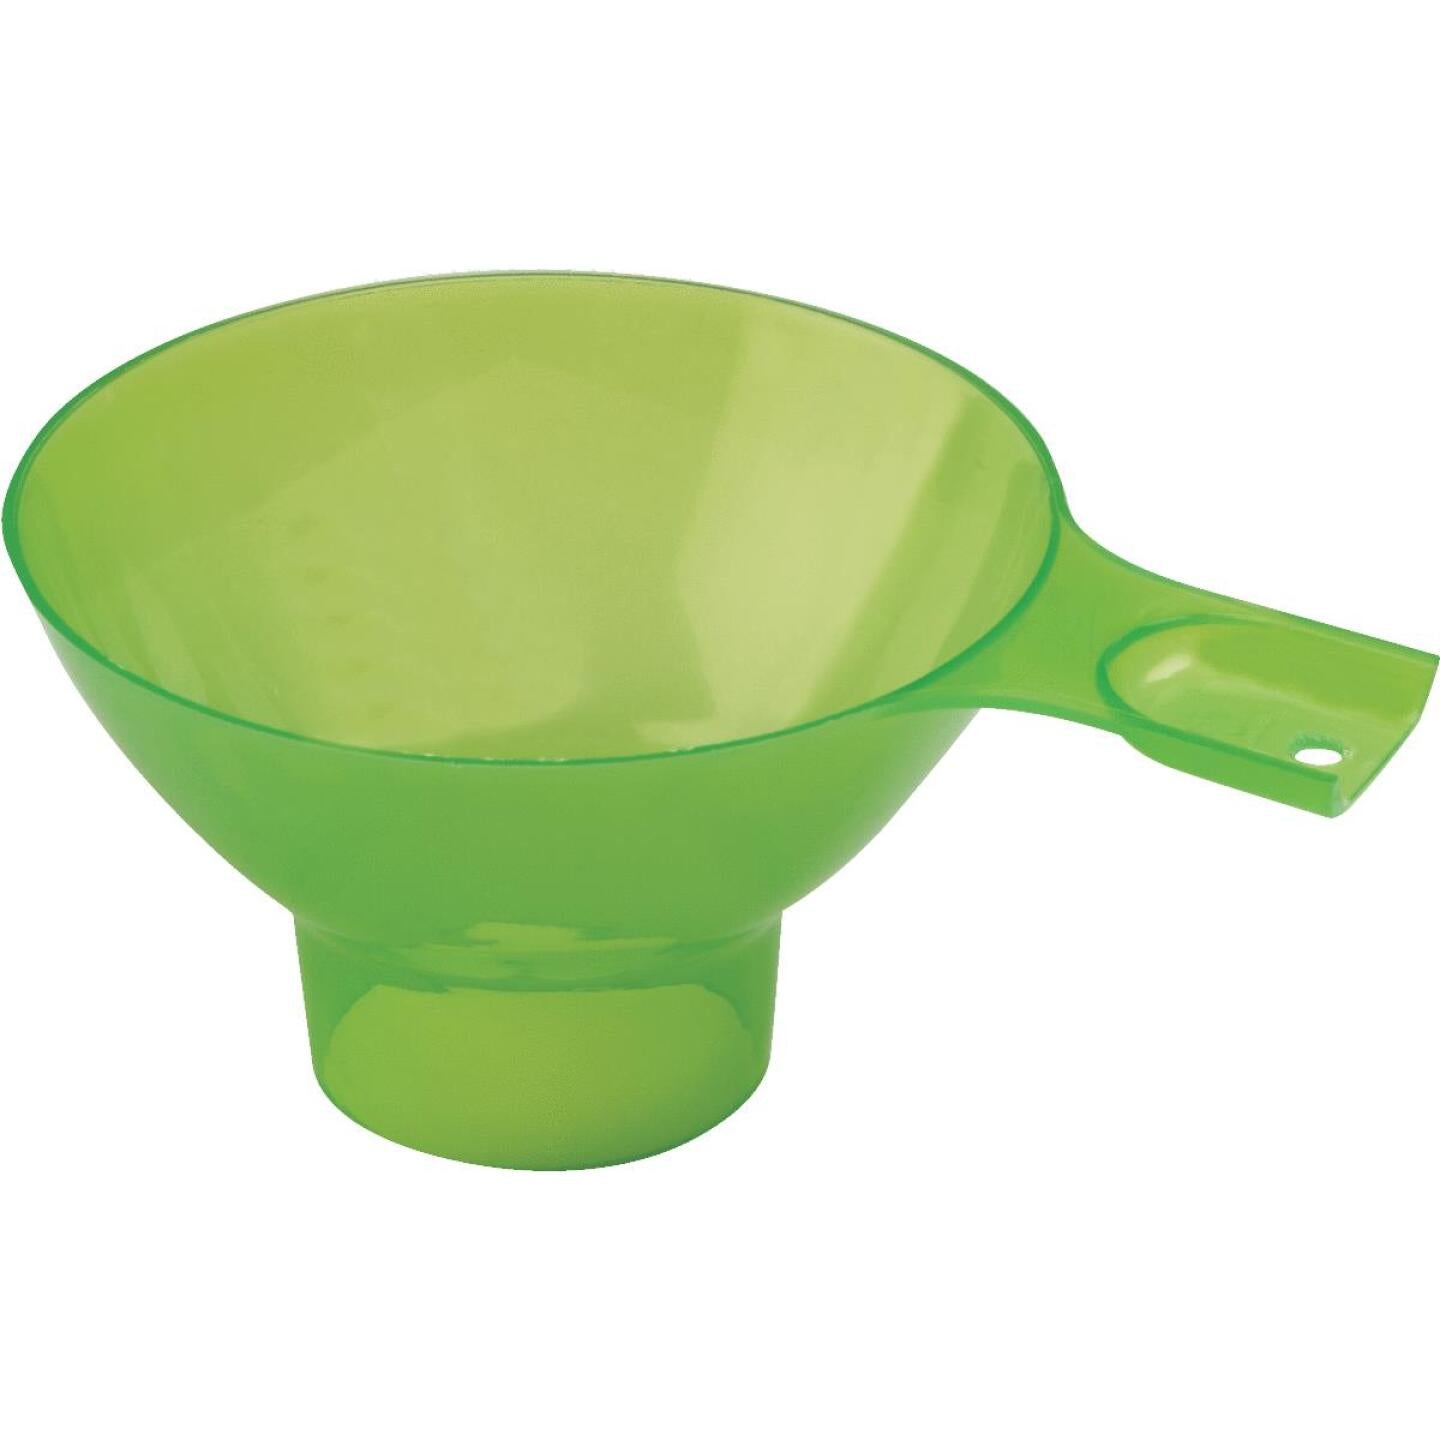 Ball, Ball Translucent Canning Funnel